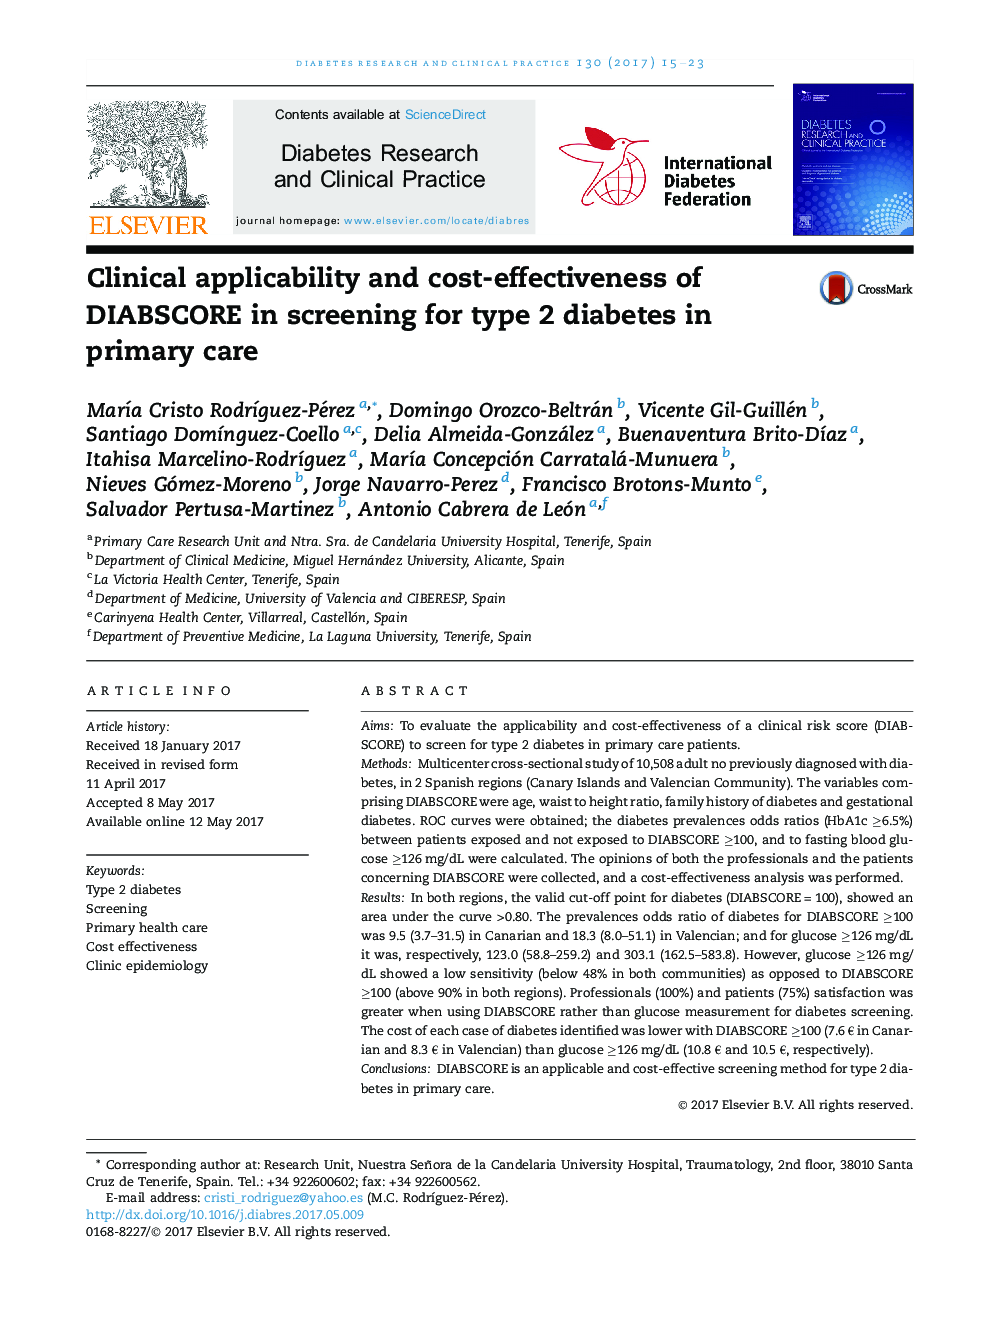 Clinical applicability and cost-effectiveness of DIABSCORE in screening for type 2 diabetes in primary care